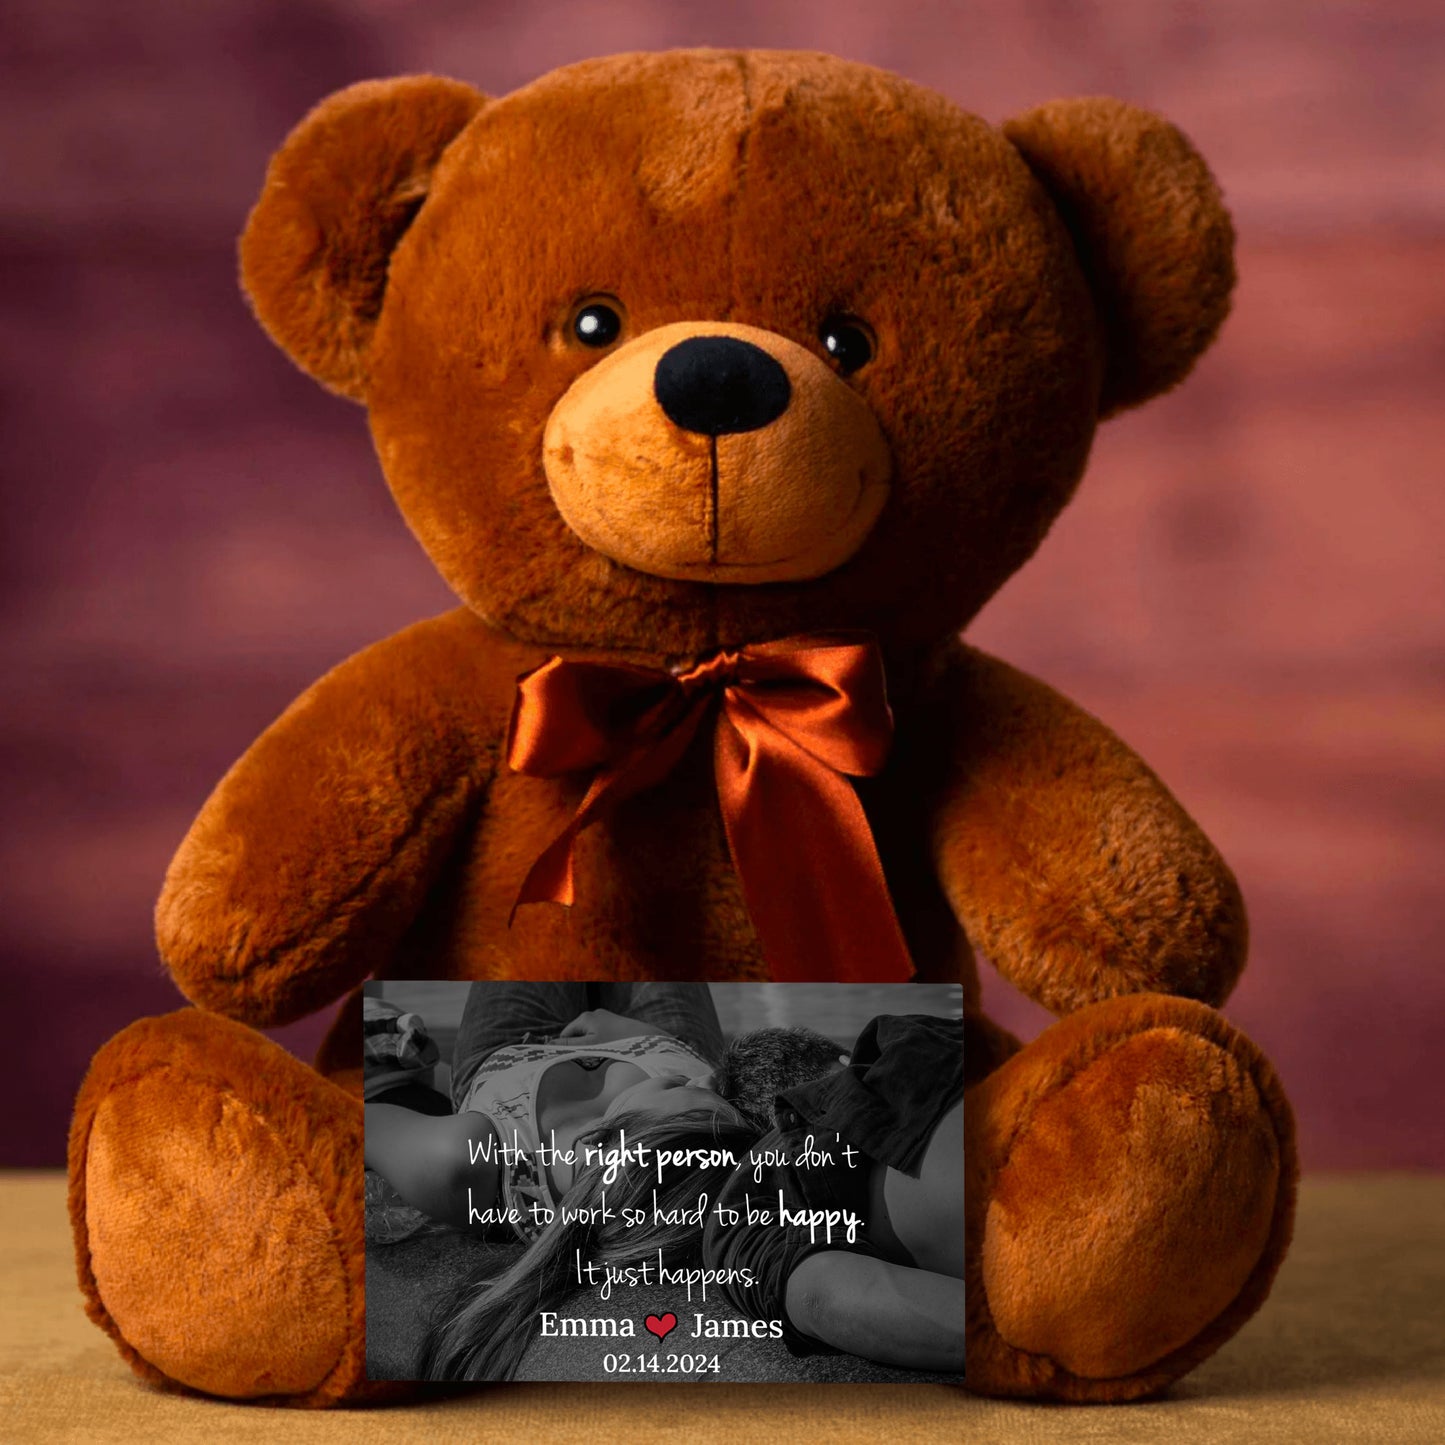 Brown Teddy Bear, Custom Message On Canvas, Your Own Personal Photo, Wedding Anniversary Gifts, Gifts for Couples, Valentines Gift